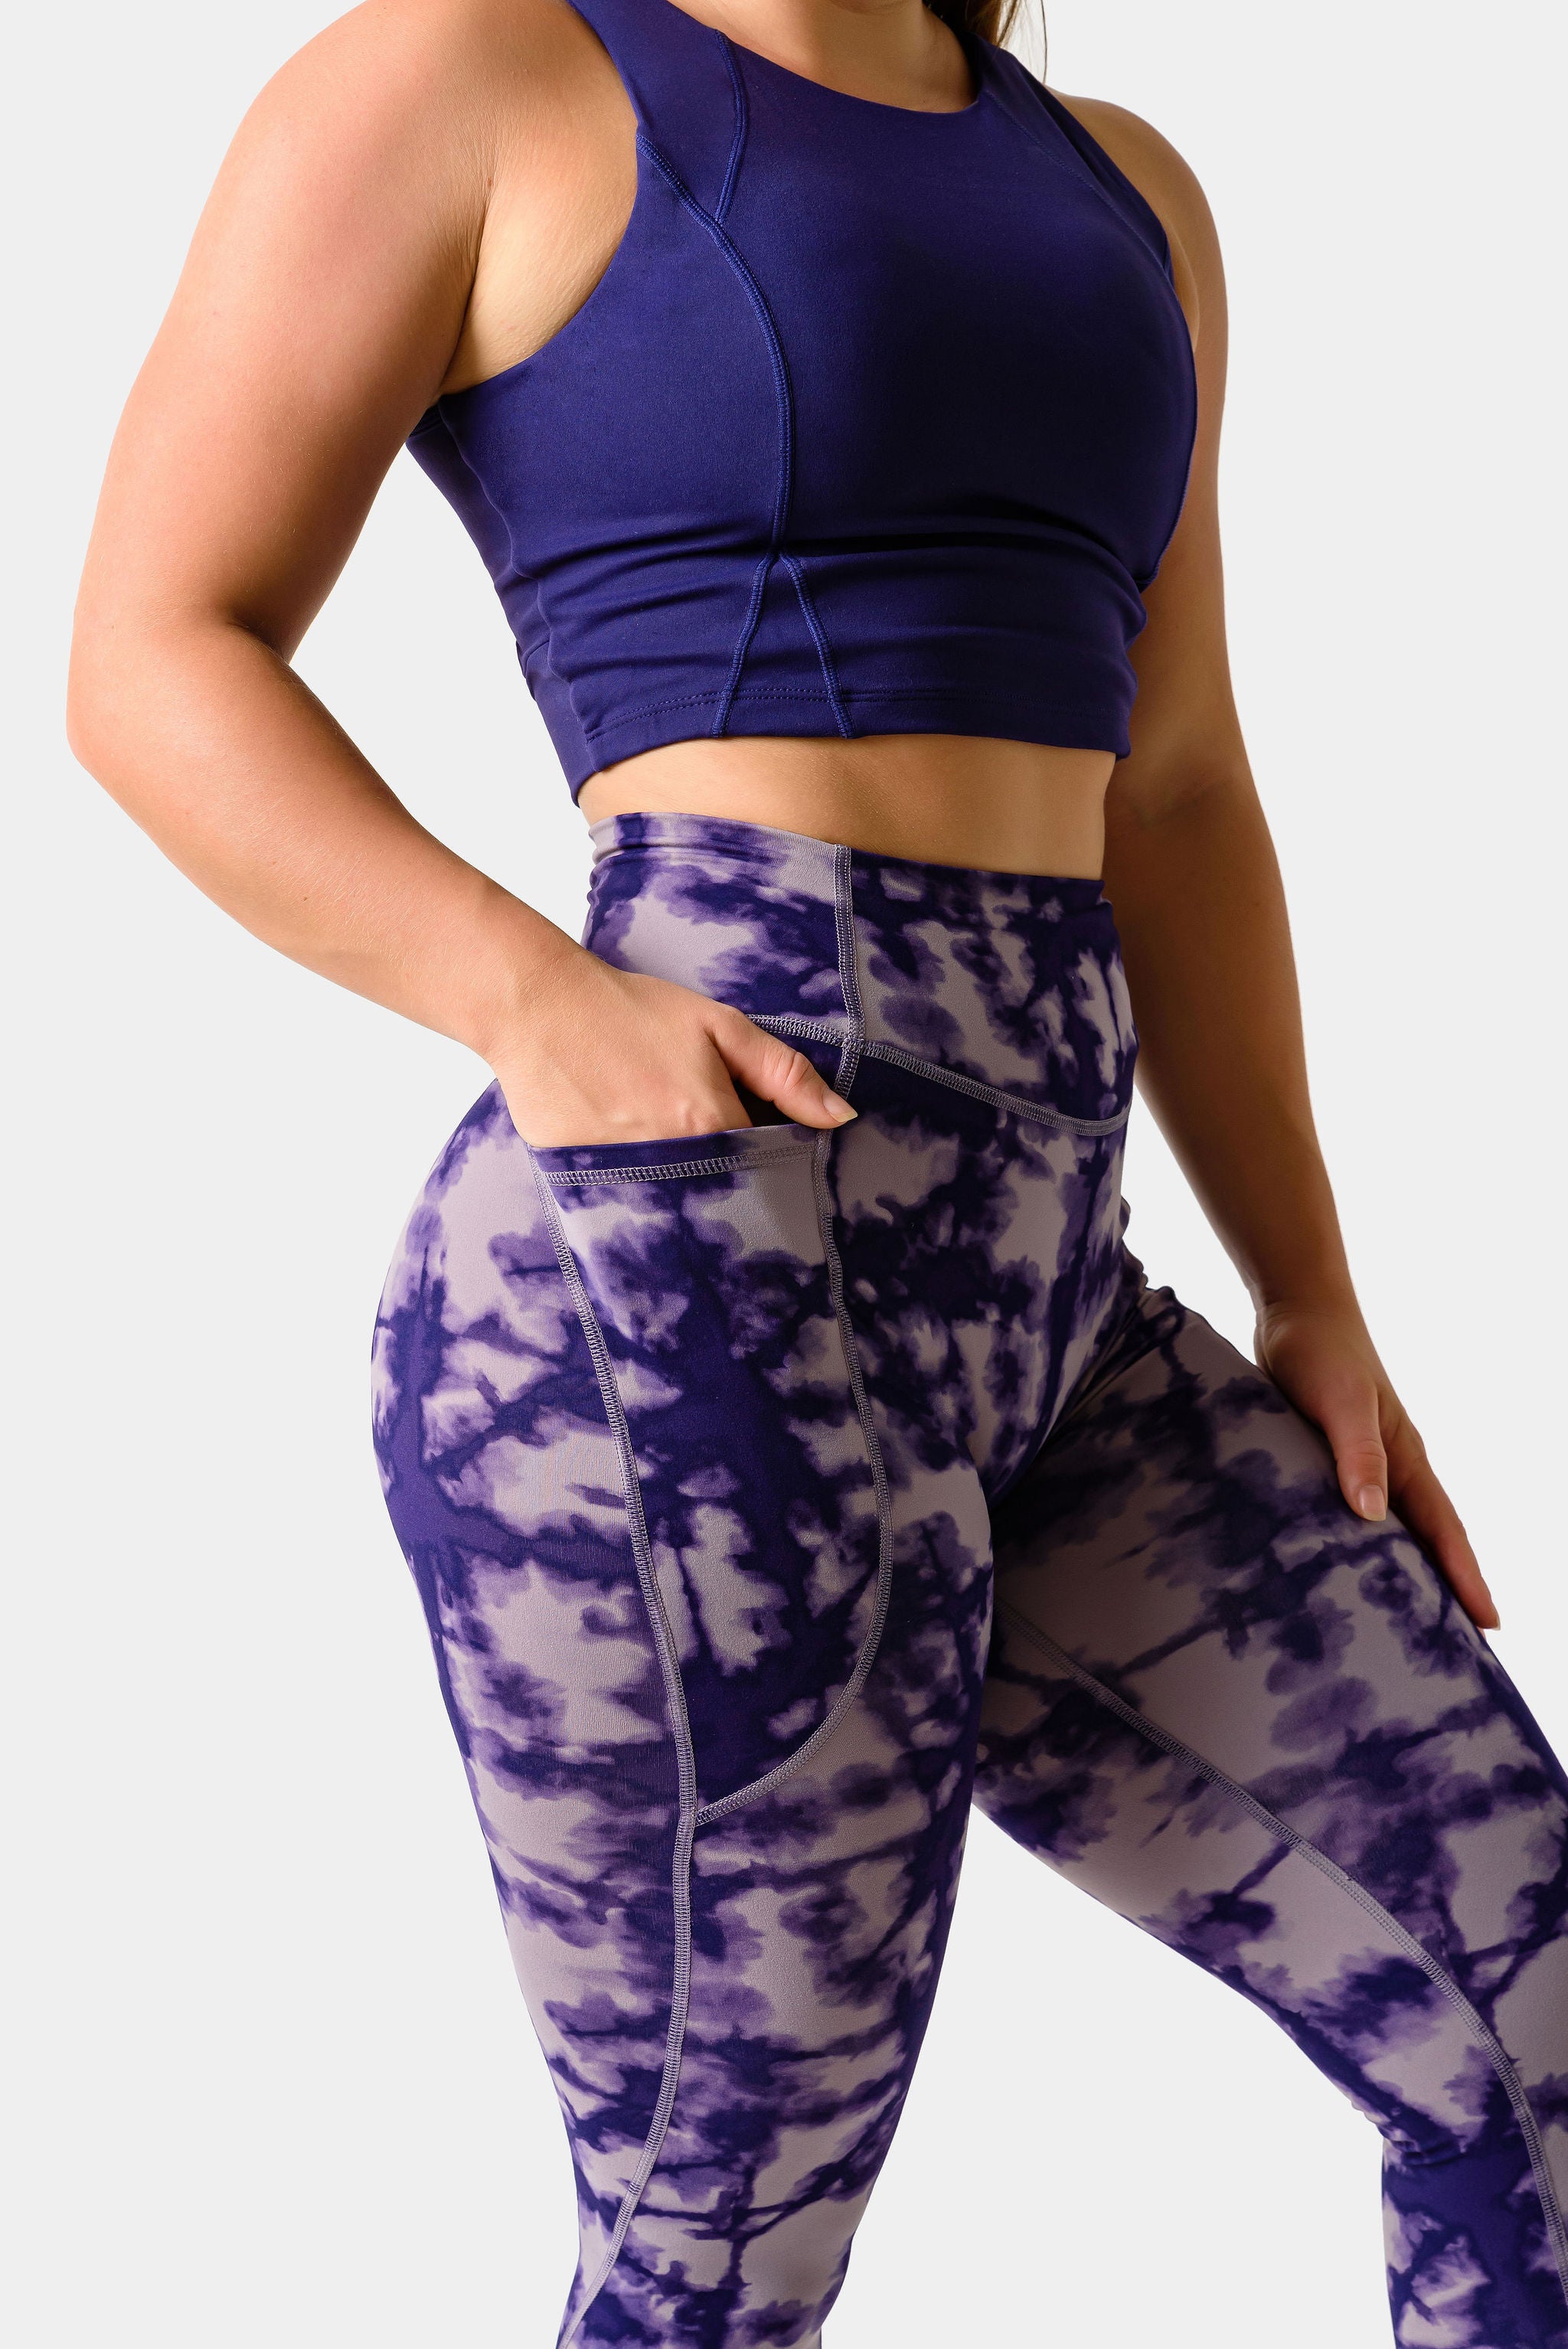 Mid Waist Blue SPORTS TIGHTS, Skin Fit at Rs 120 in Satna